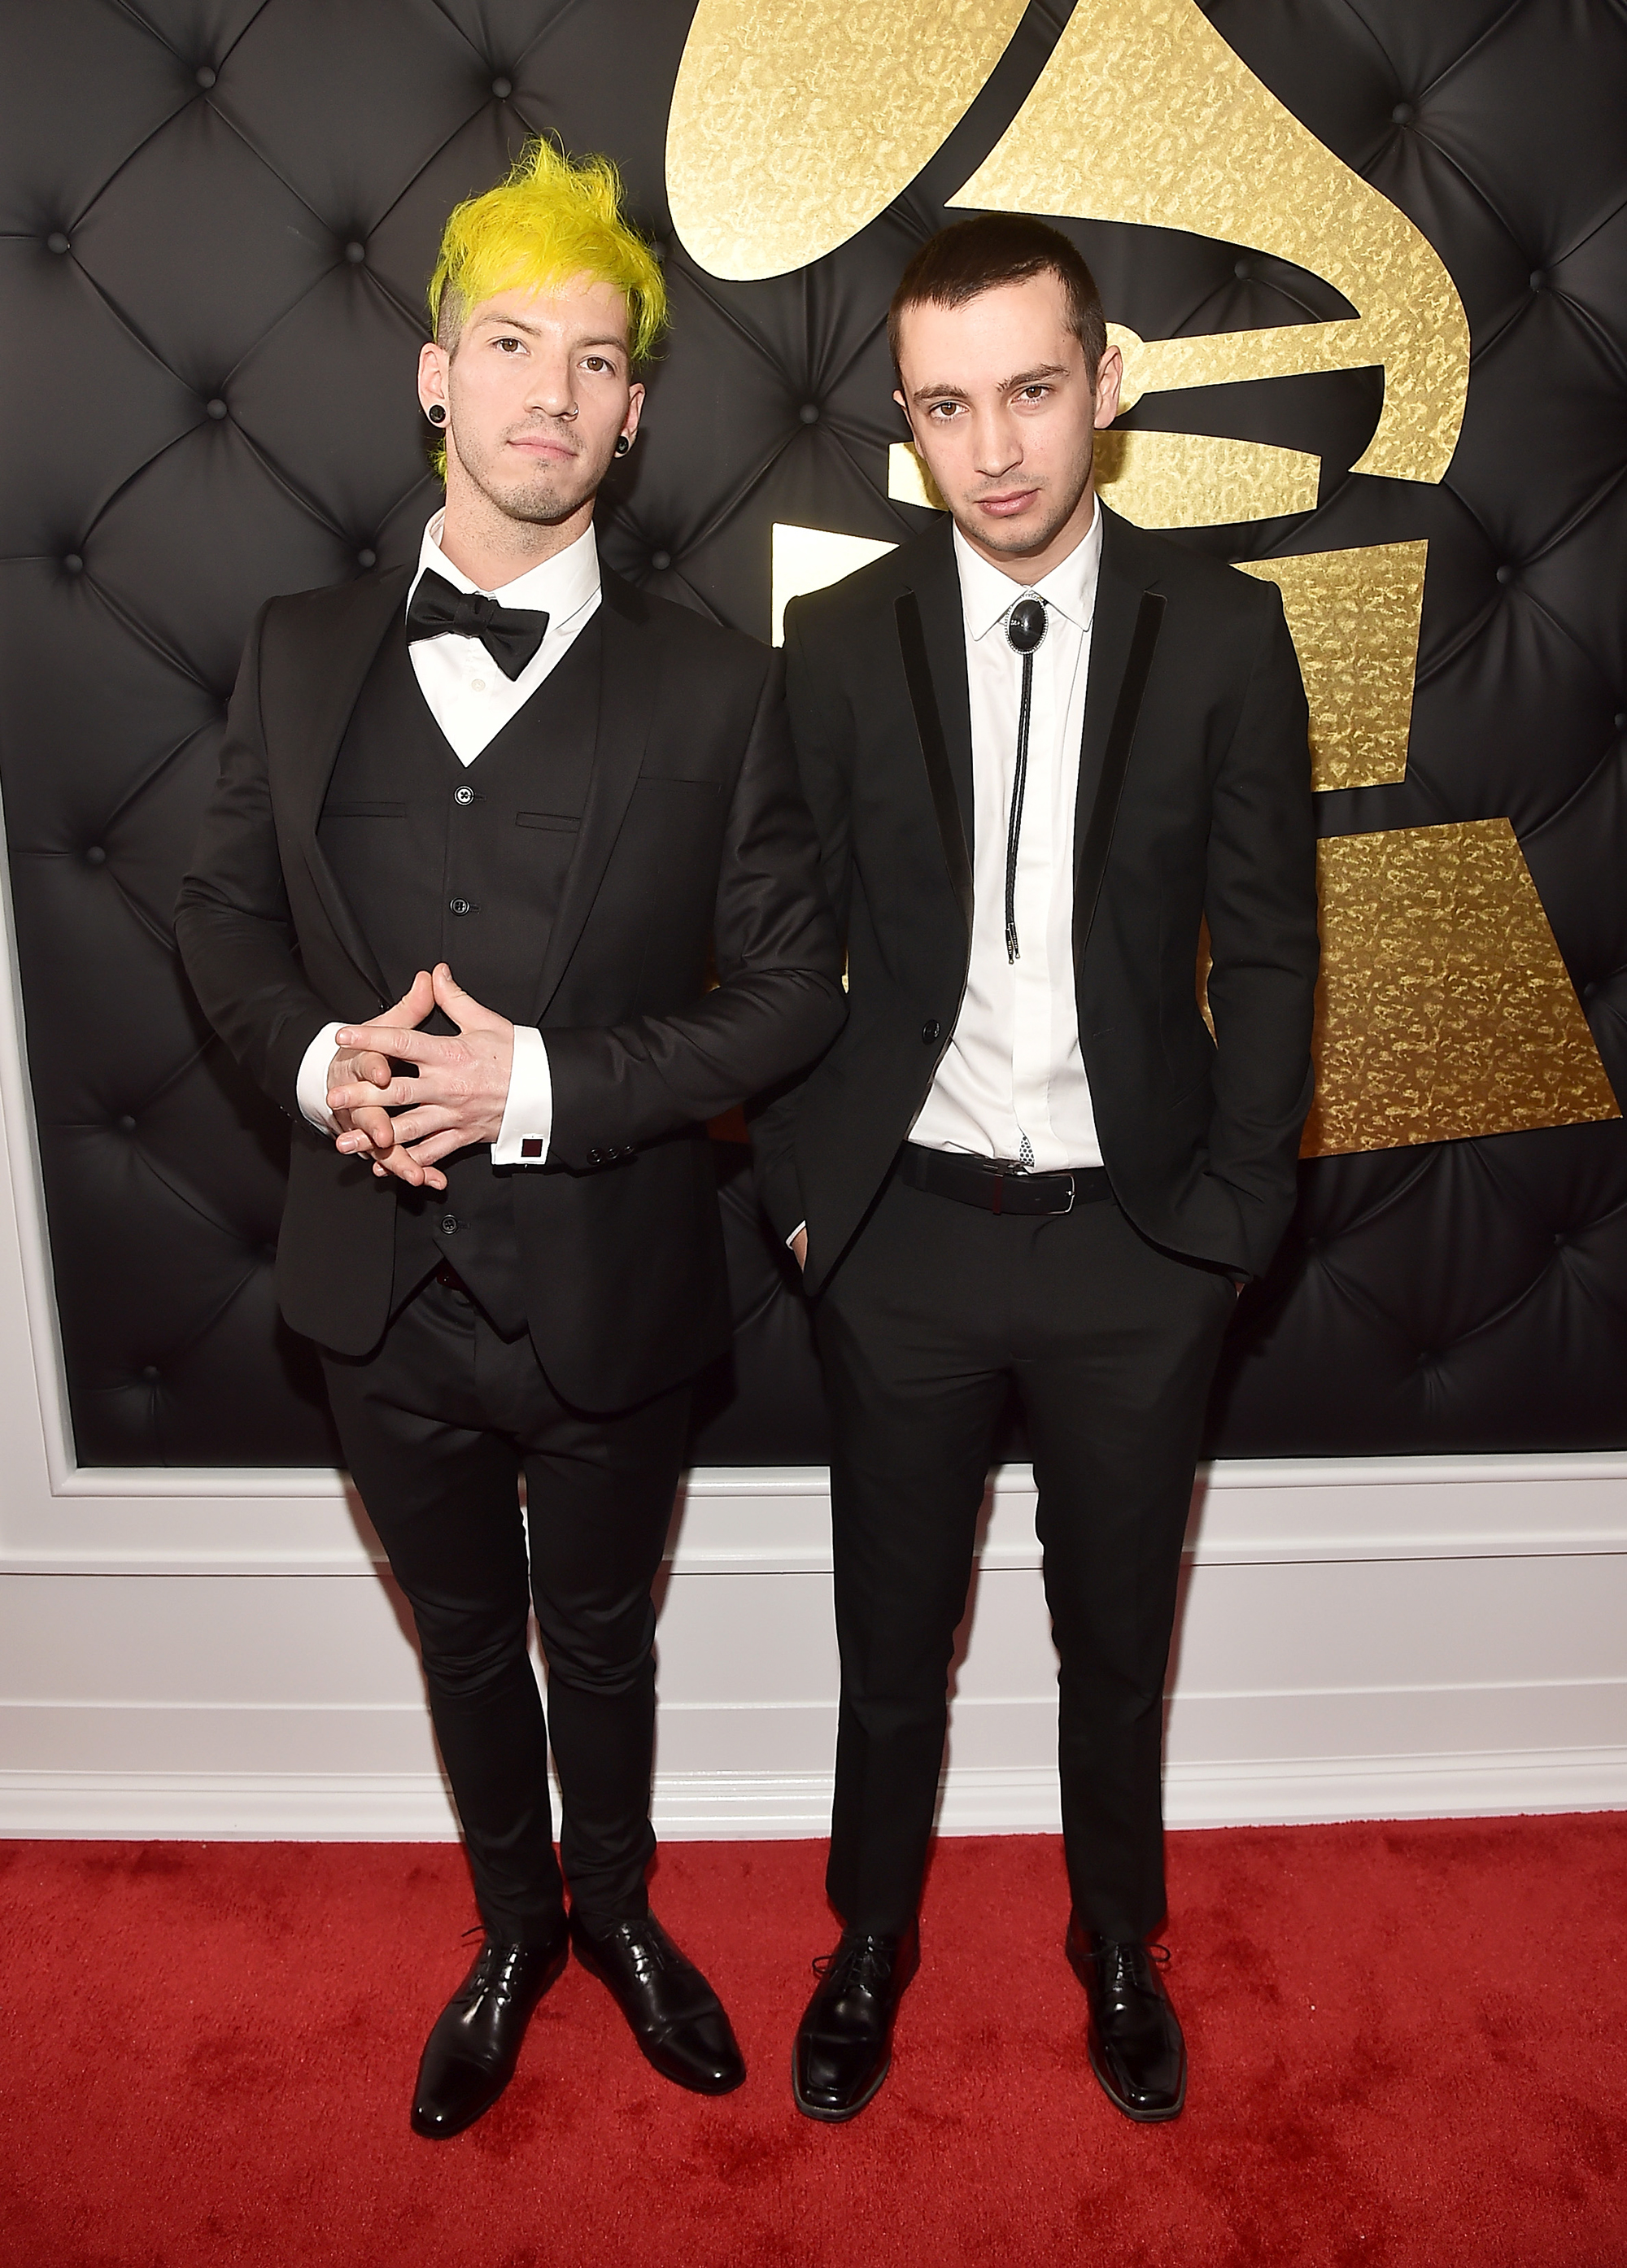 Josh Dun and Tyler Joseph of Twenty One Pilots attend the 59th GRAMMY Awards at STAPLES Center, on Feb. 12, 2017 in Los Angeles.